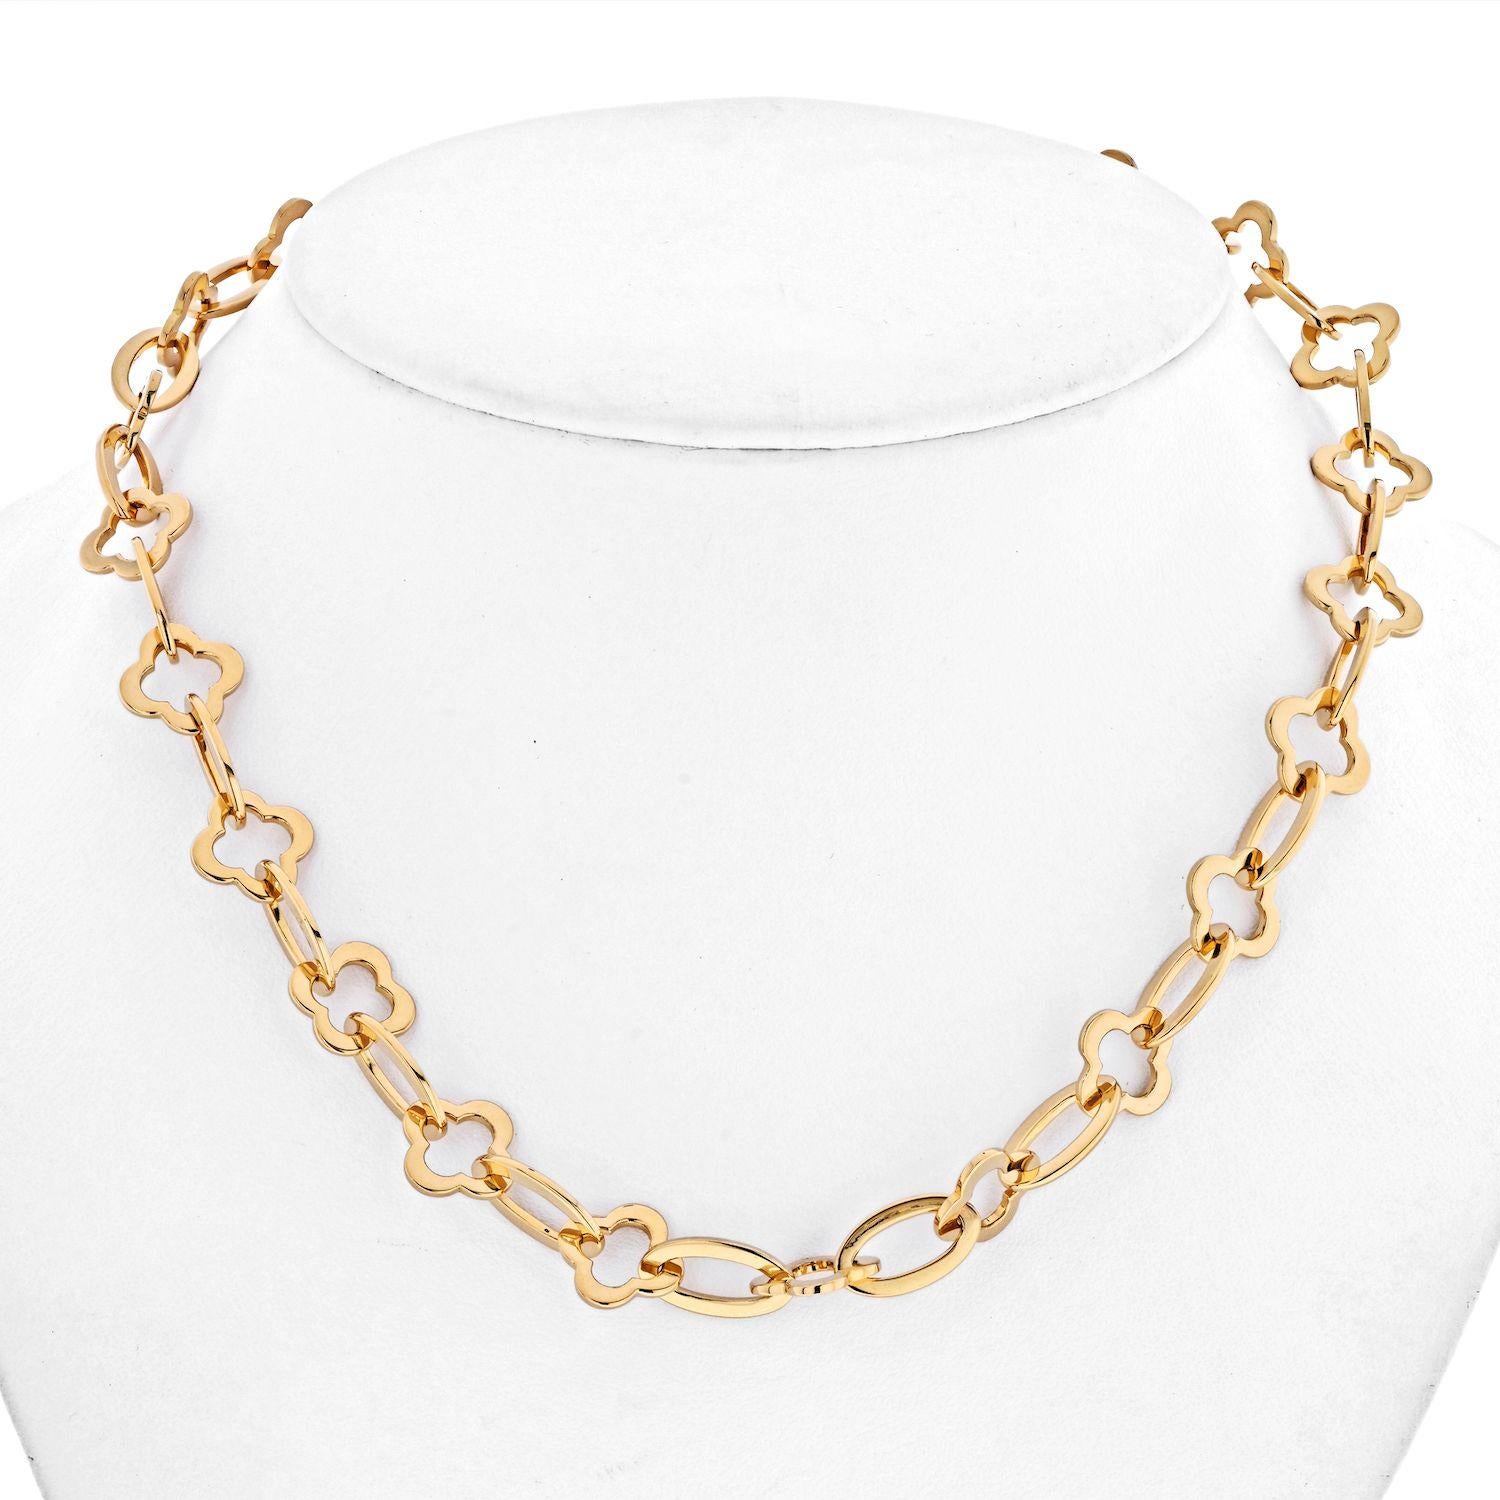 Easy to wear yellow gold chain necklace that comes to us from the famouse Paris house of Van Cleef & Arpels. 
An 18 karat yellow gold Byzantine Alhambra 16 inch chain necklace, circa 1990. Designed as a series of polished gold openwork Alhambra